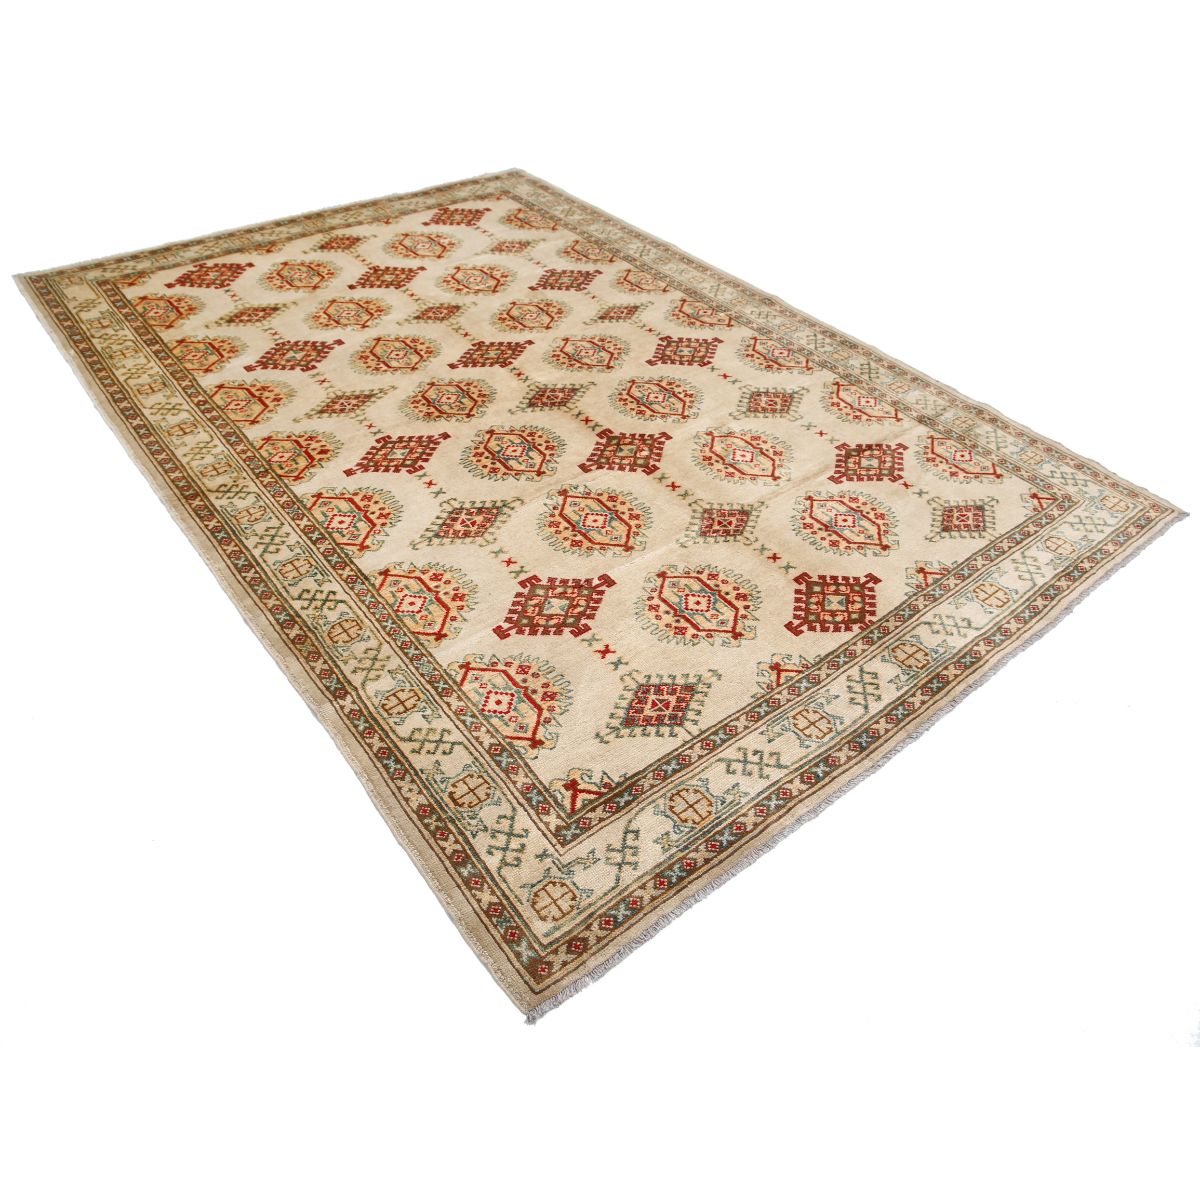 Revival 6' 7" X 9' 4" Wool Hand Knotted Rug